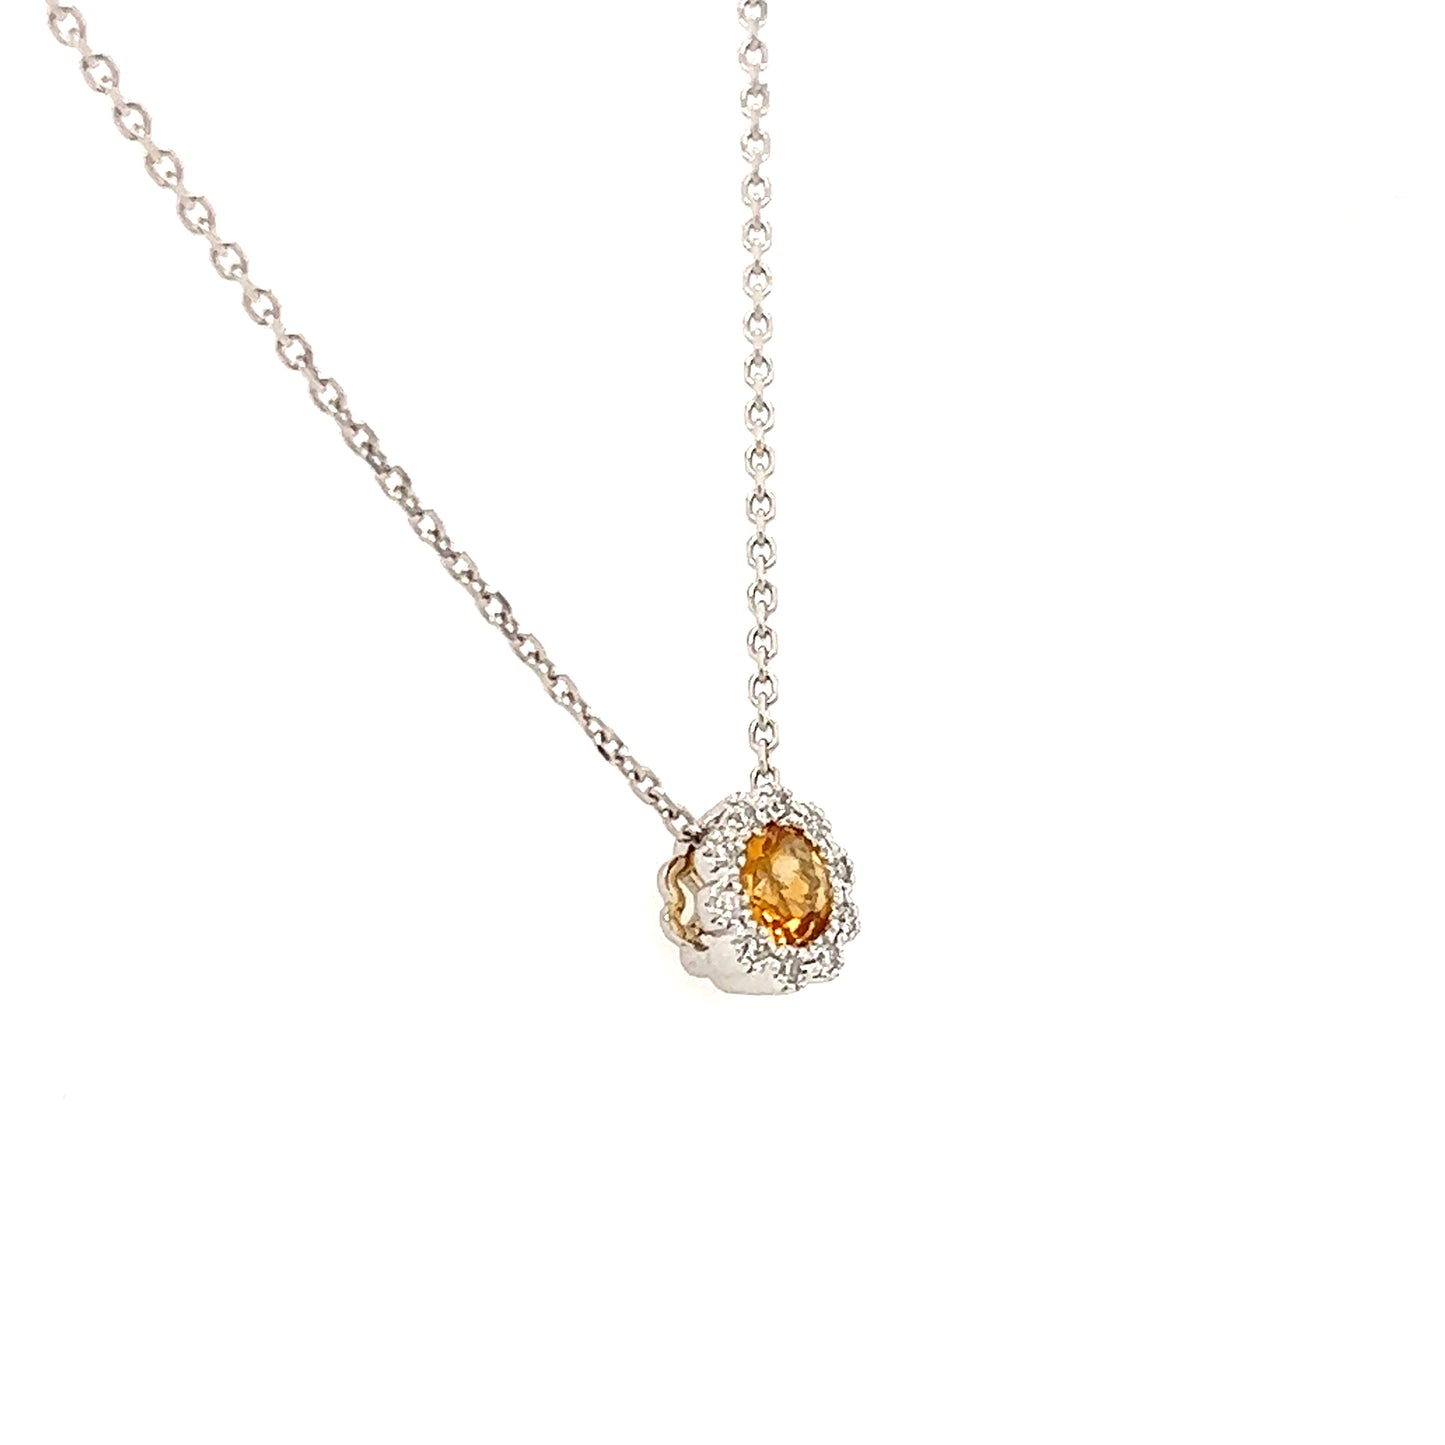 Floral Citrine Pendant with Diamond Halo in 14K White Gold Right Side View Pendant and Chain